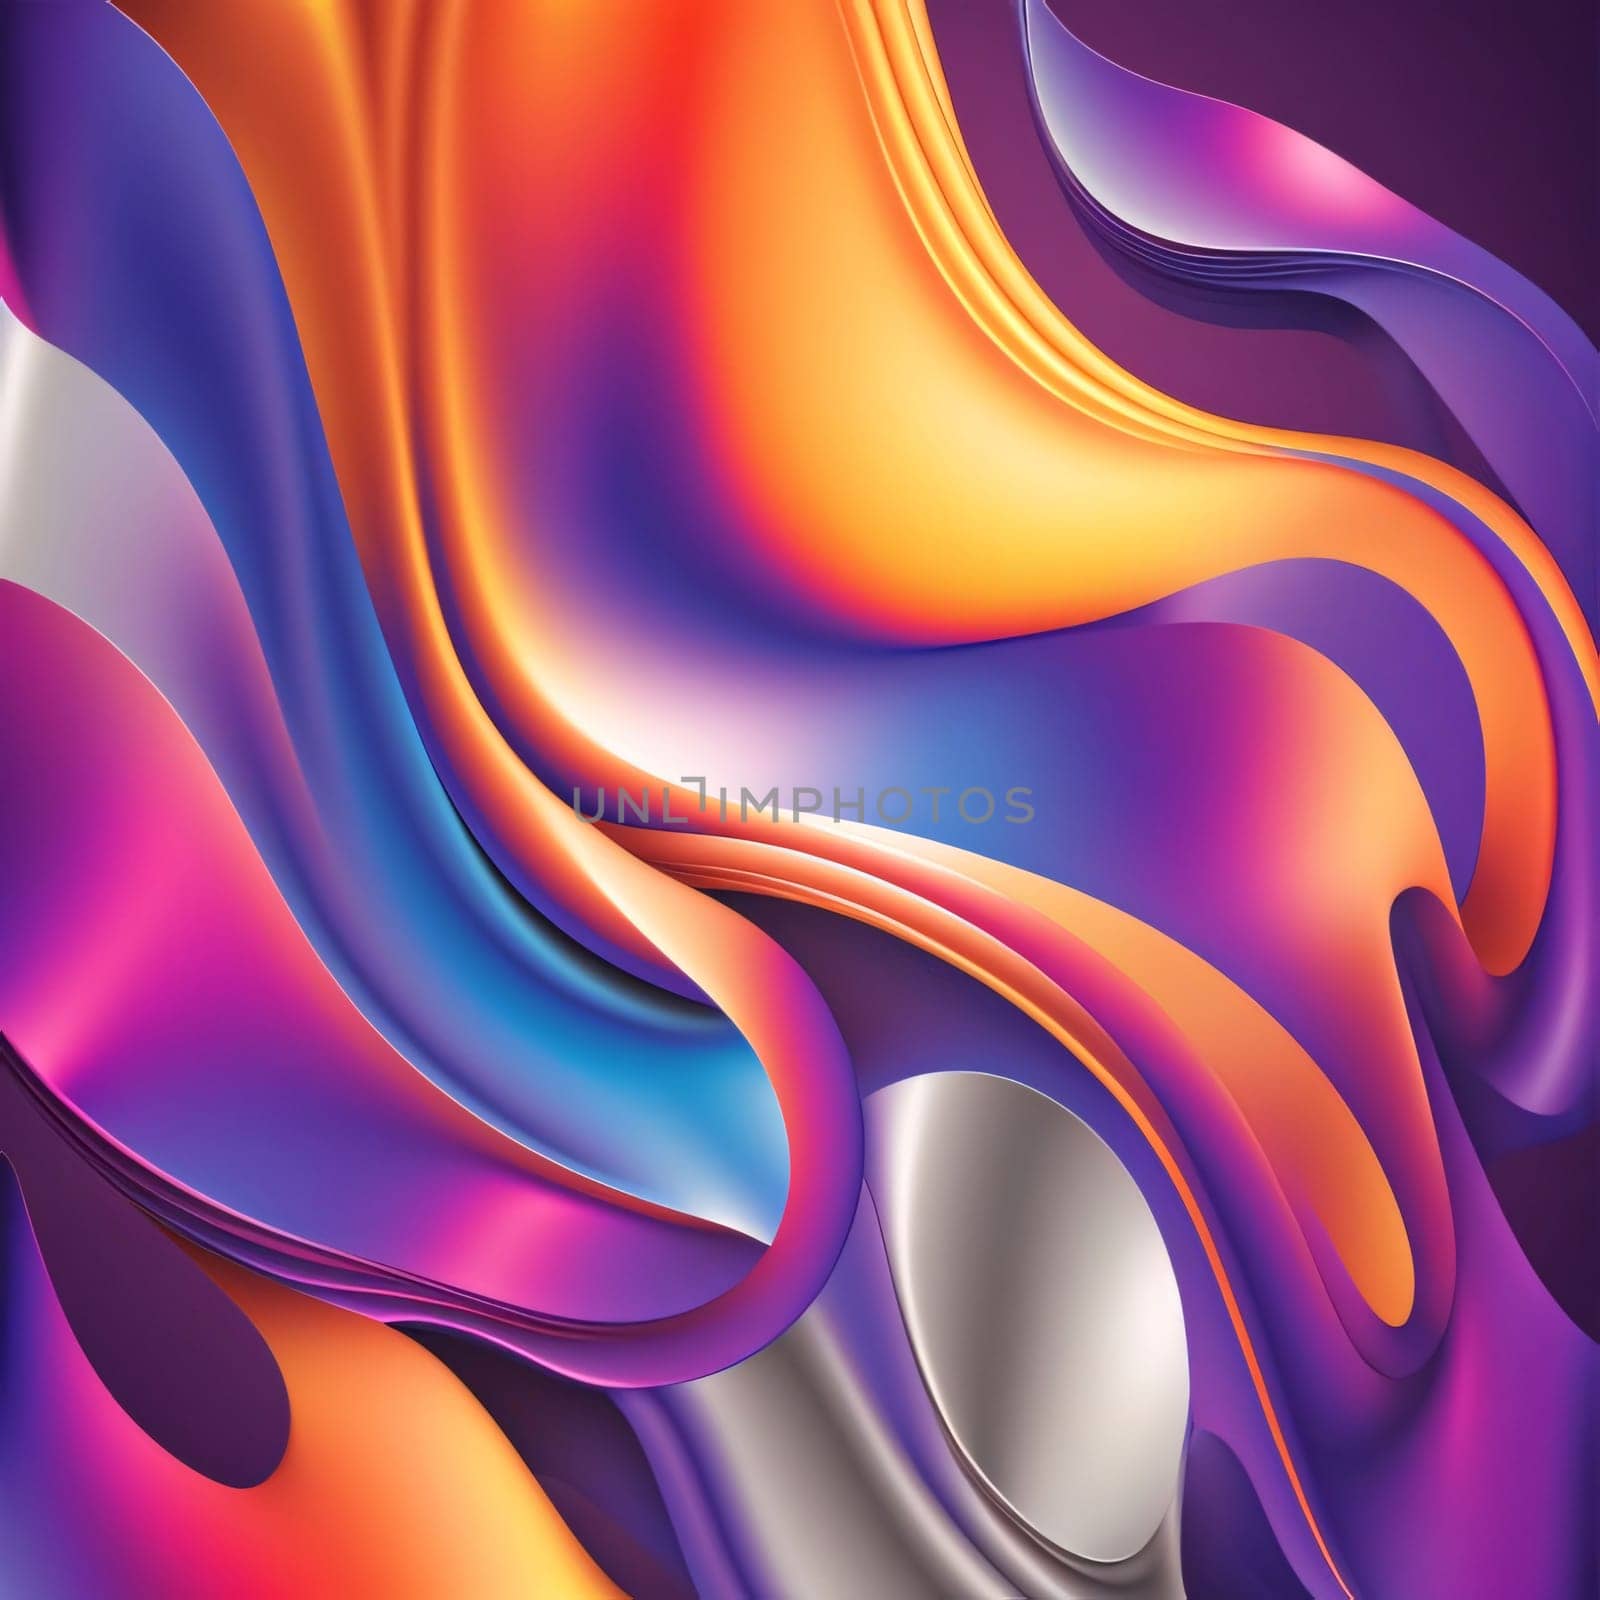 Abstract background design: Colorful abstract background with wavy lines. Vector illustration EPS10